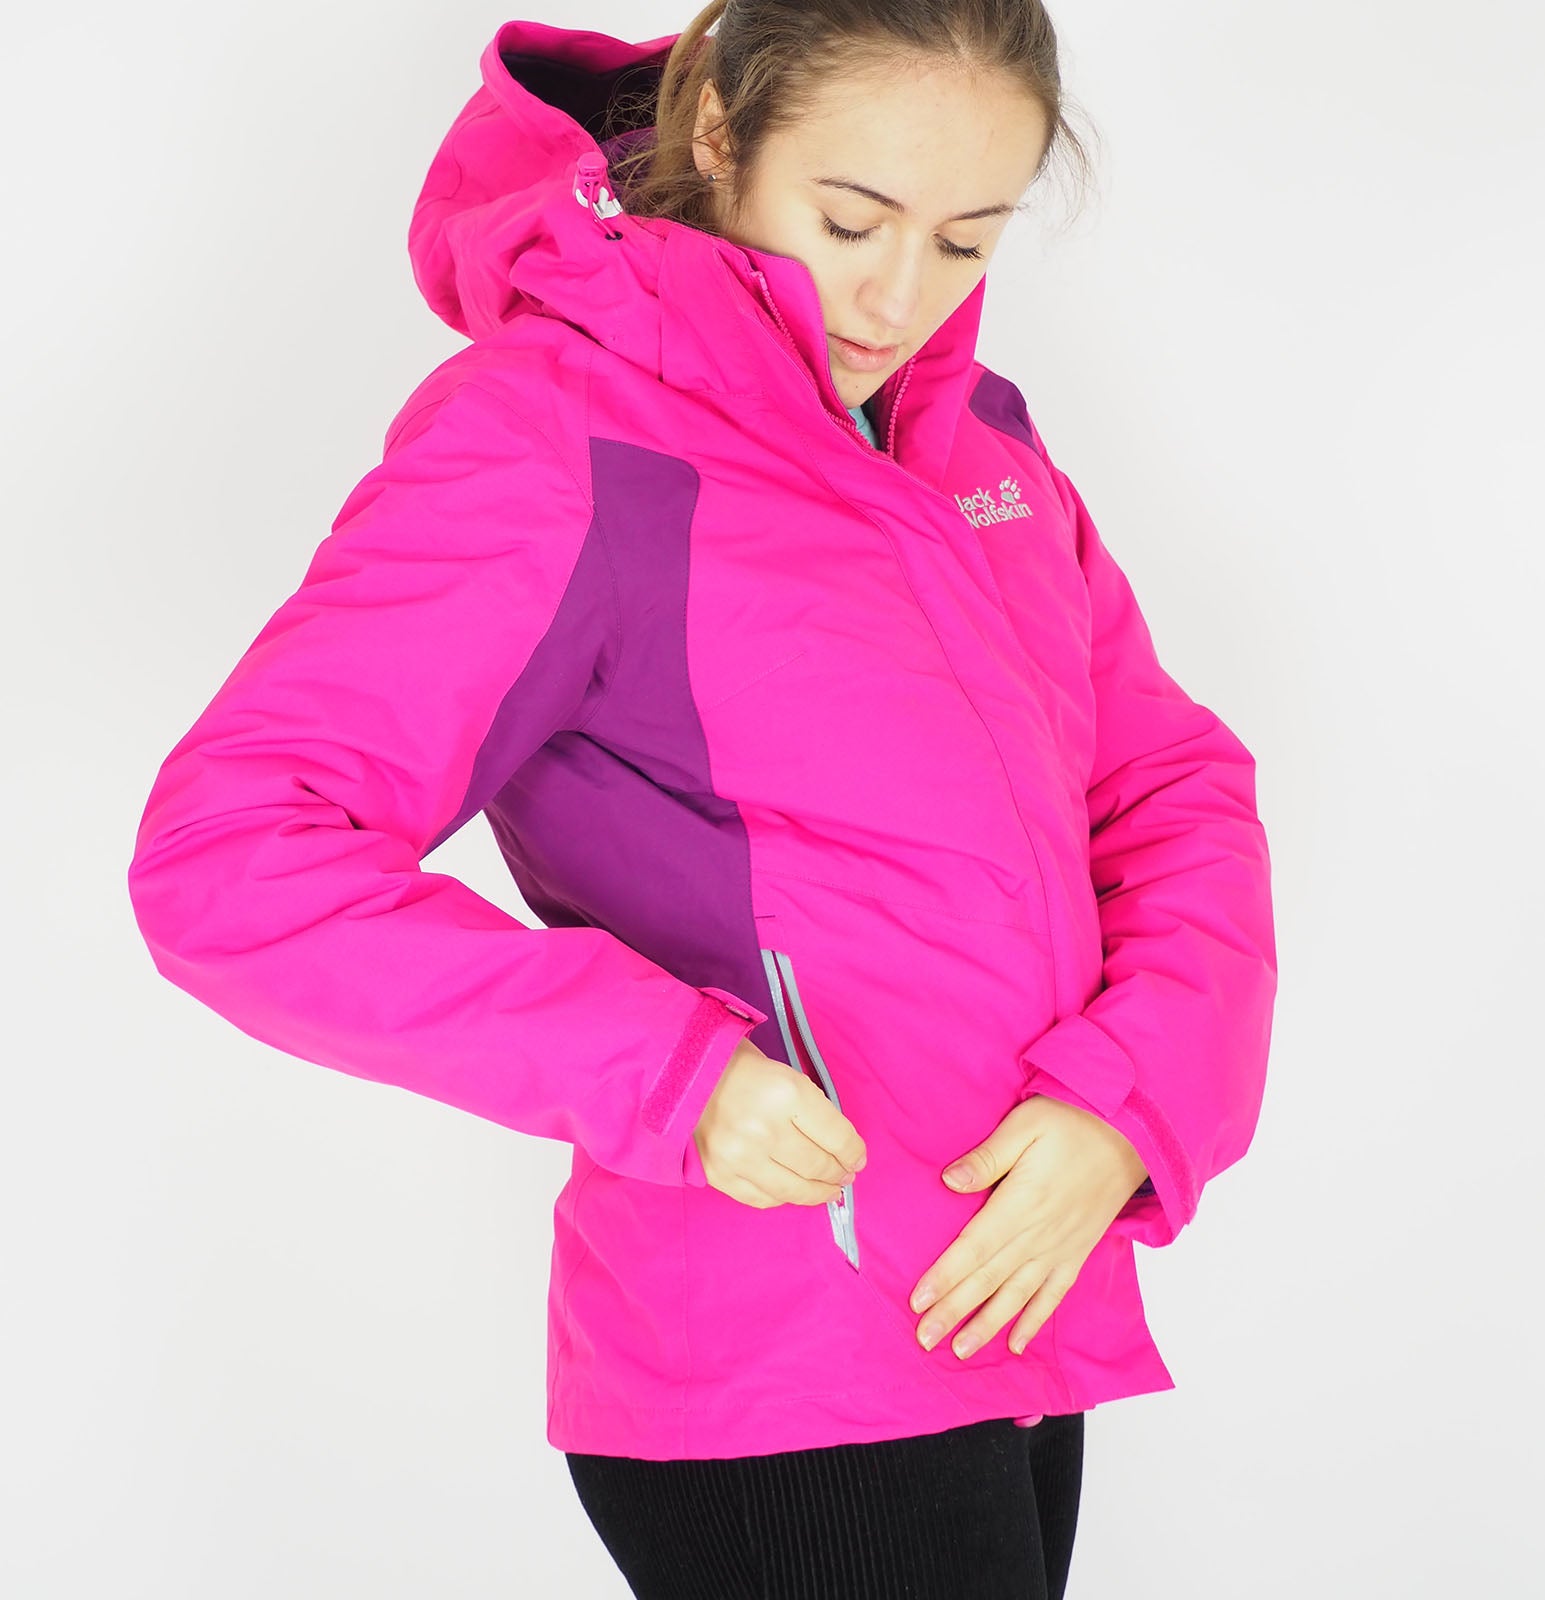 Womens Jack Wolfskin 3 In 1 Asian Fit 5004941 Pink Passion Zip Up Hiking Jacket